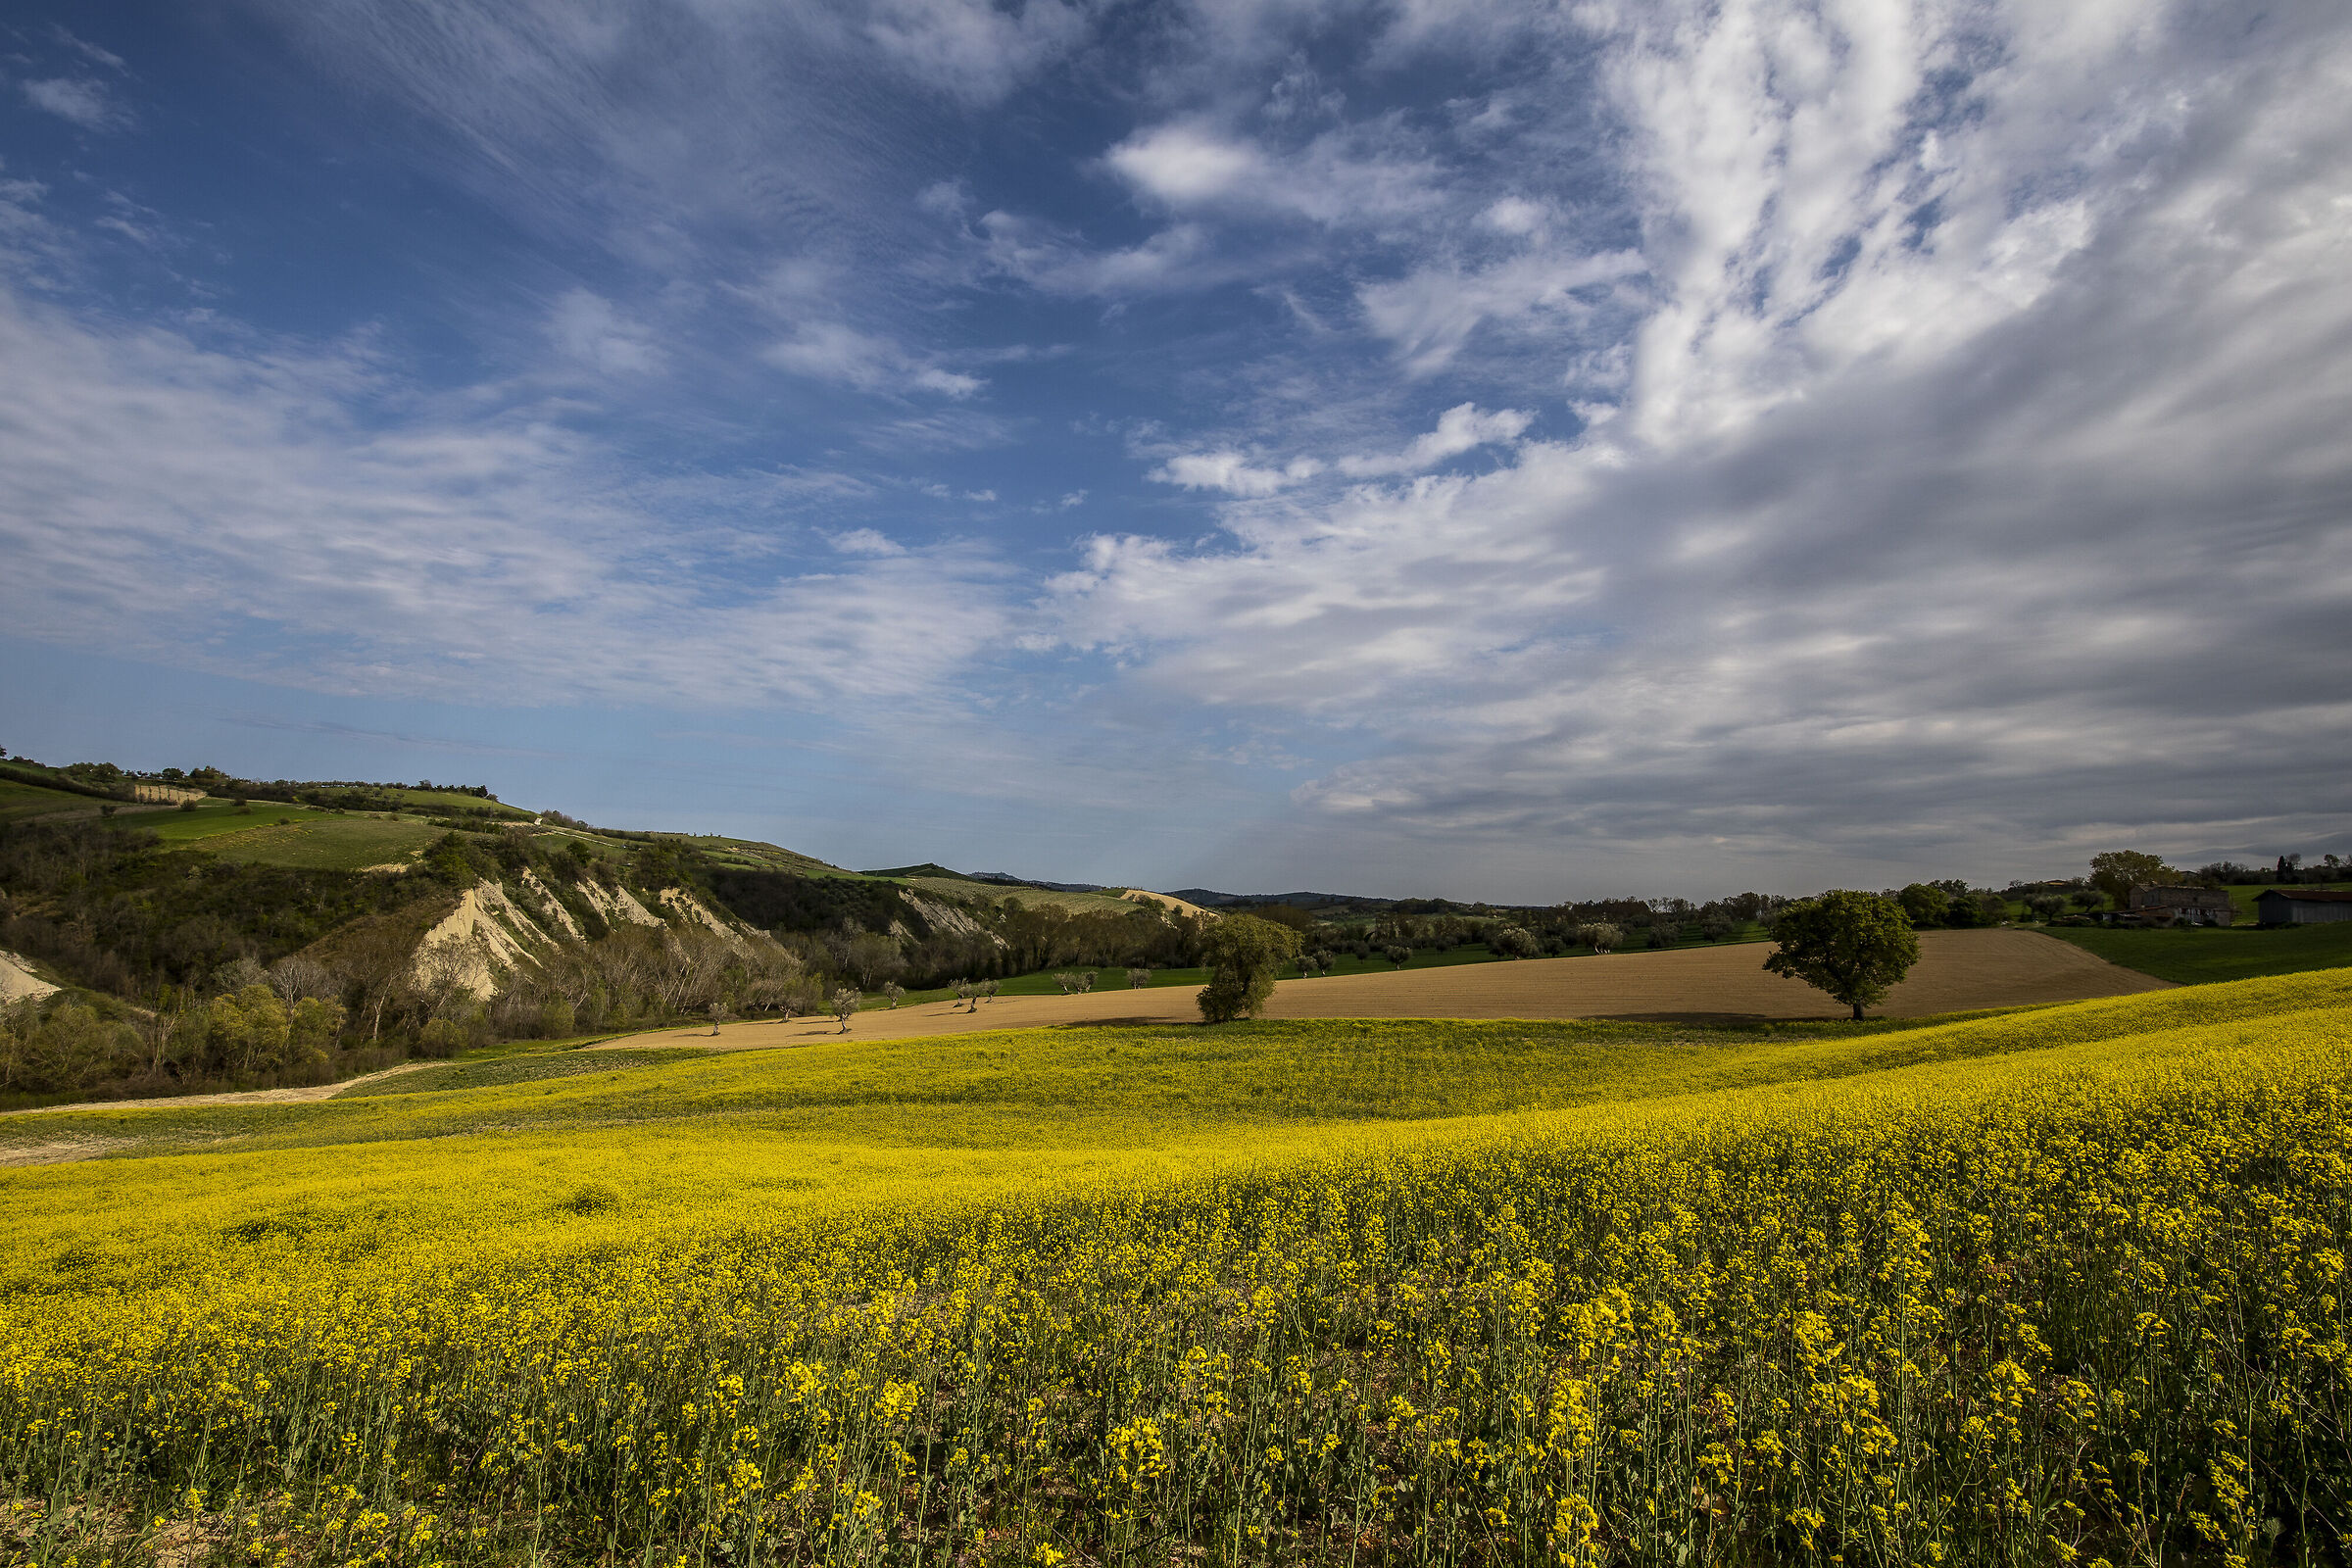 Between rapeseed and gullies...